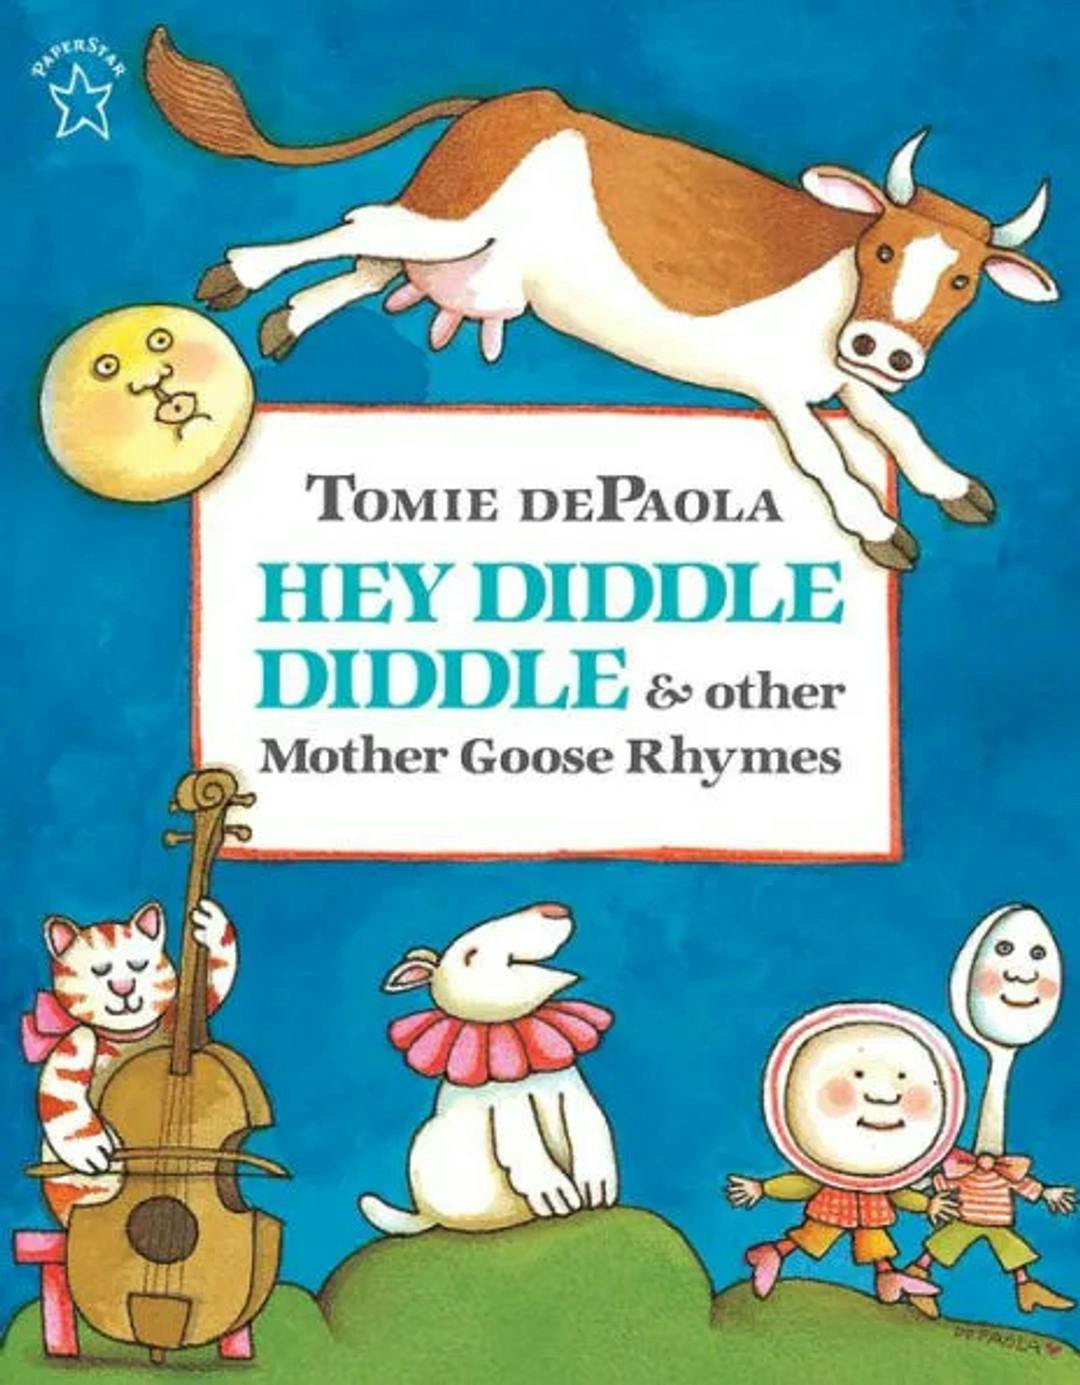 Hey Diddle Diddle and other Mother Goose Rhymes